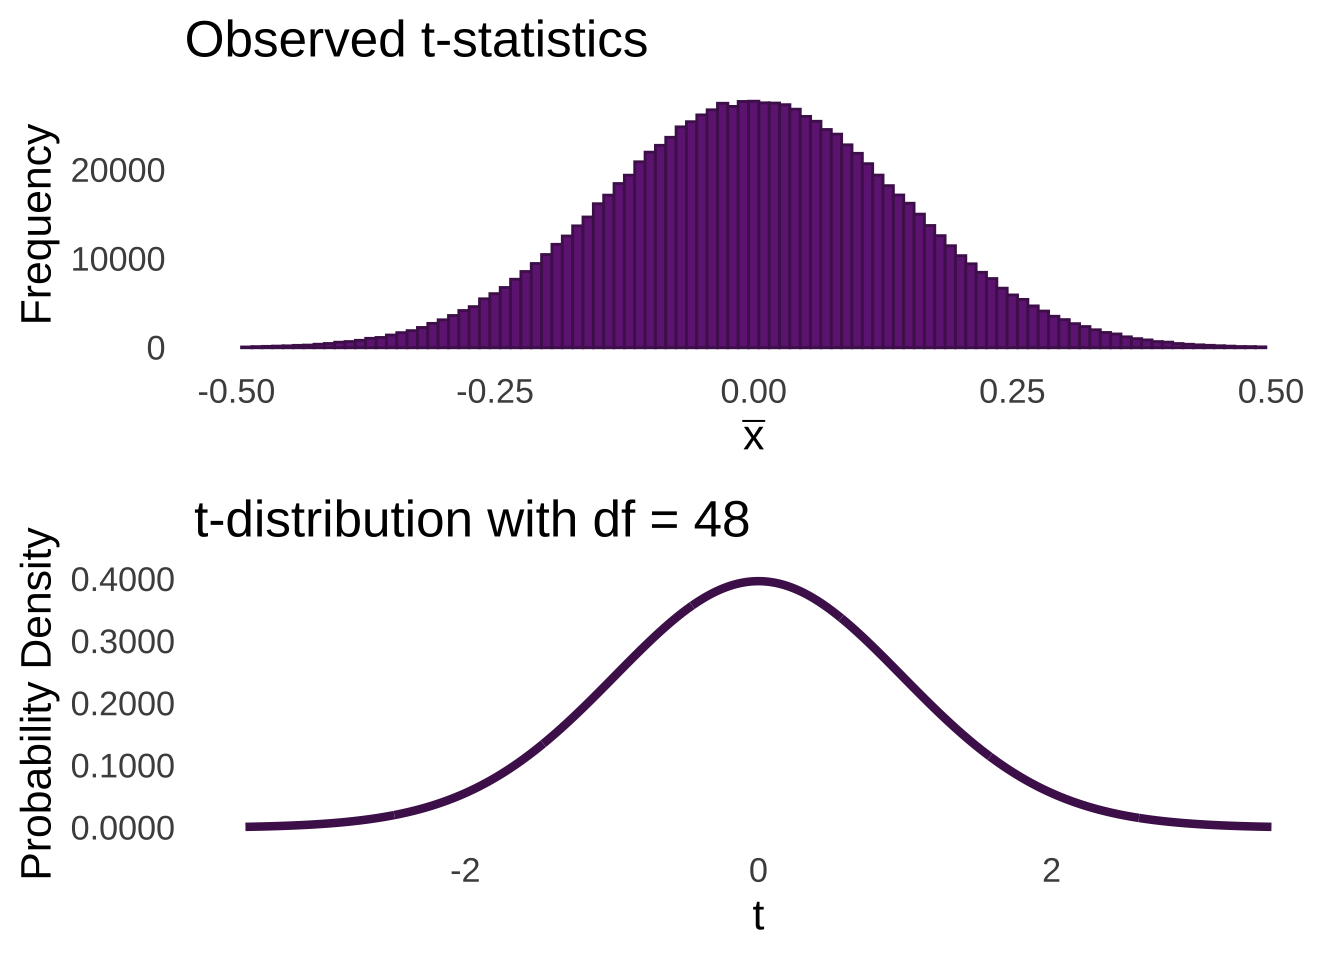 Histogram of $t$-statistics (top) and $t$-distribution with $df = 48$ (bottom)